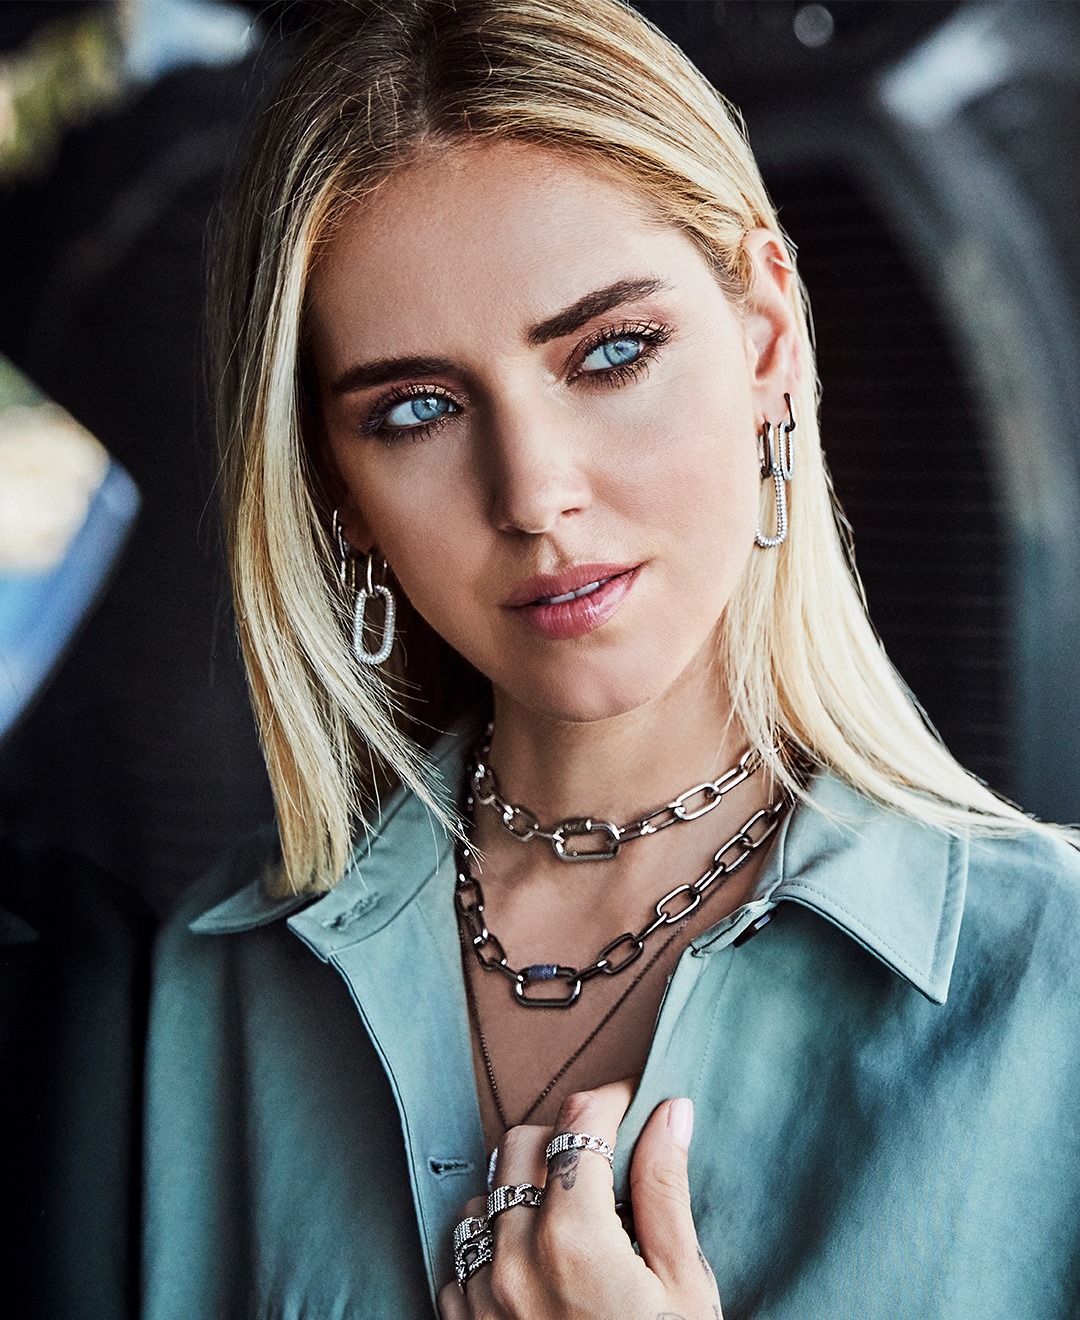 Introducing Collection GARÇONNE with Chiara Ferragni.   A fashionable mix of unisex styles, collection GARÇONNE with its simple clean lines and a touch of timeless elegance, is a perfect mix of style and edge.